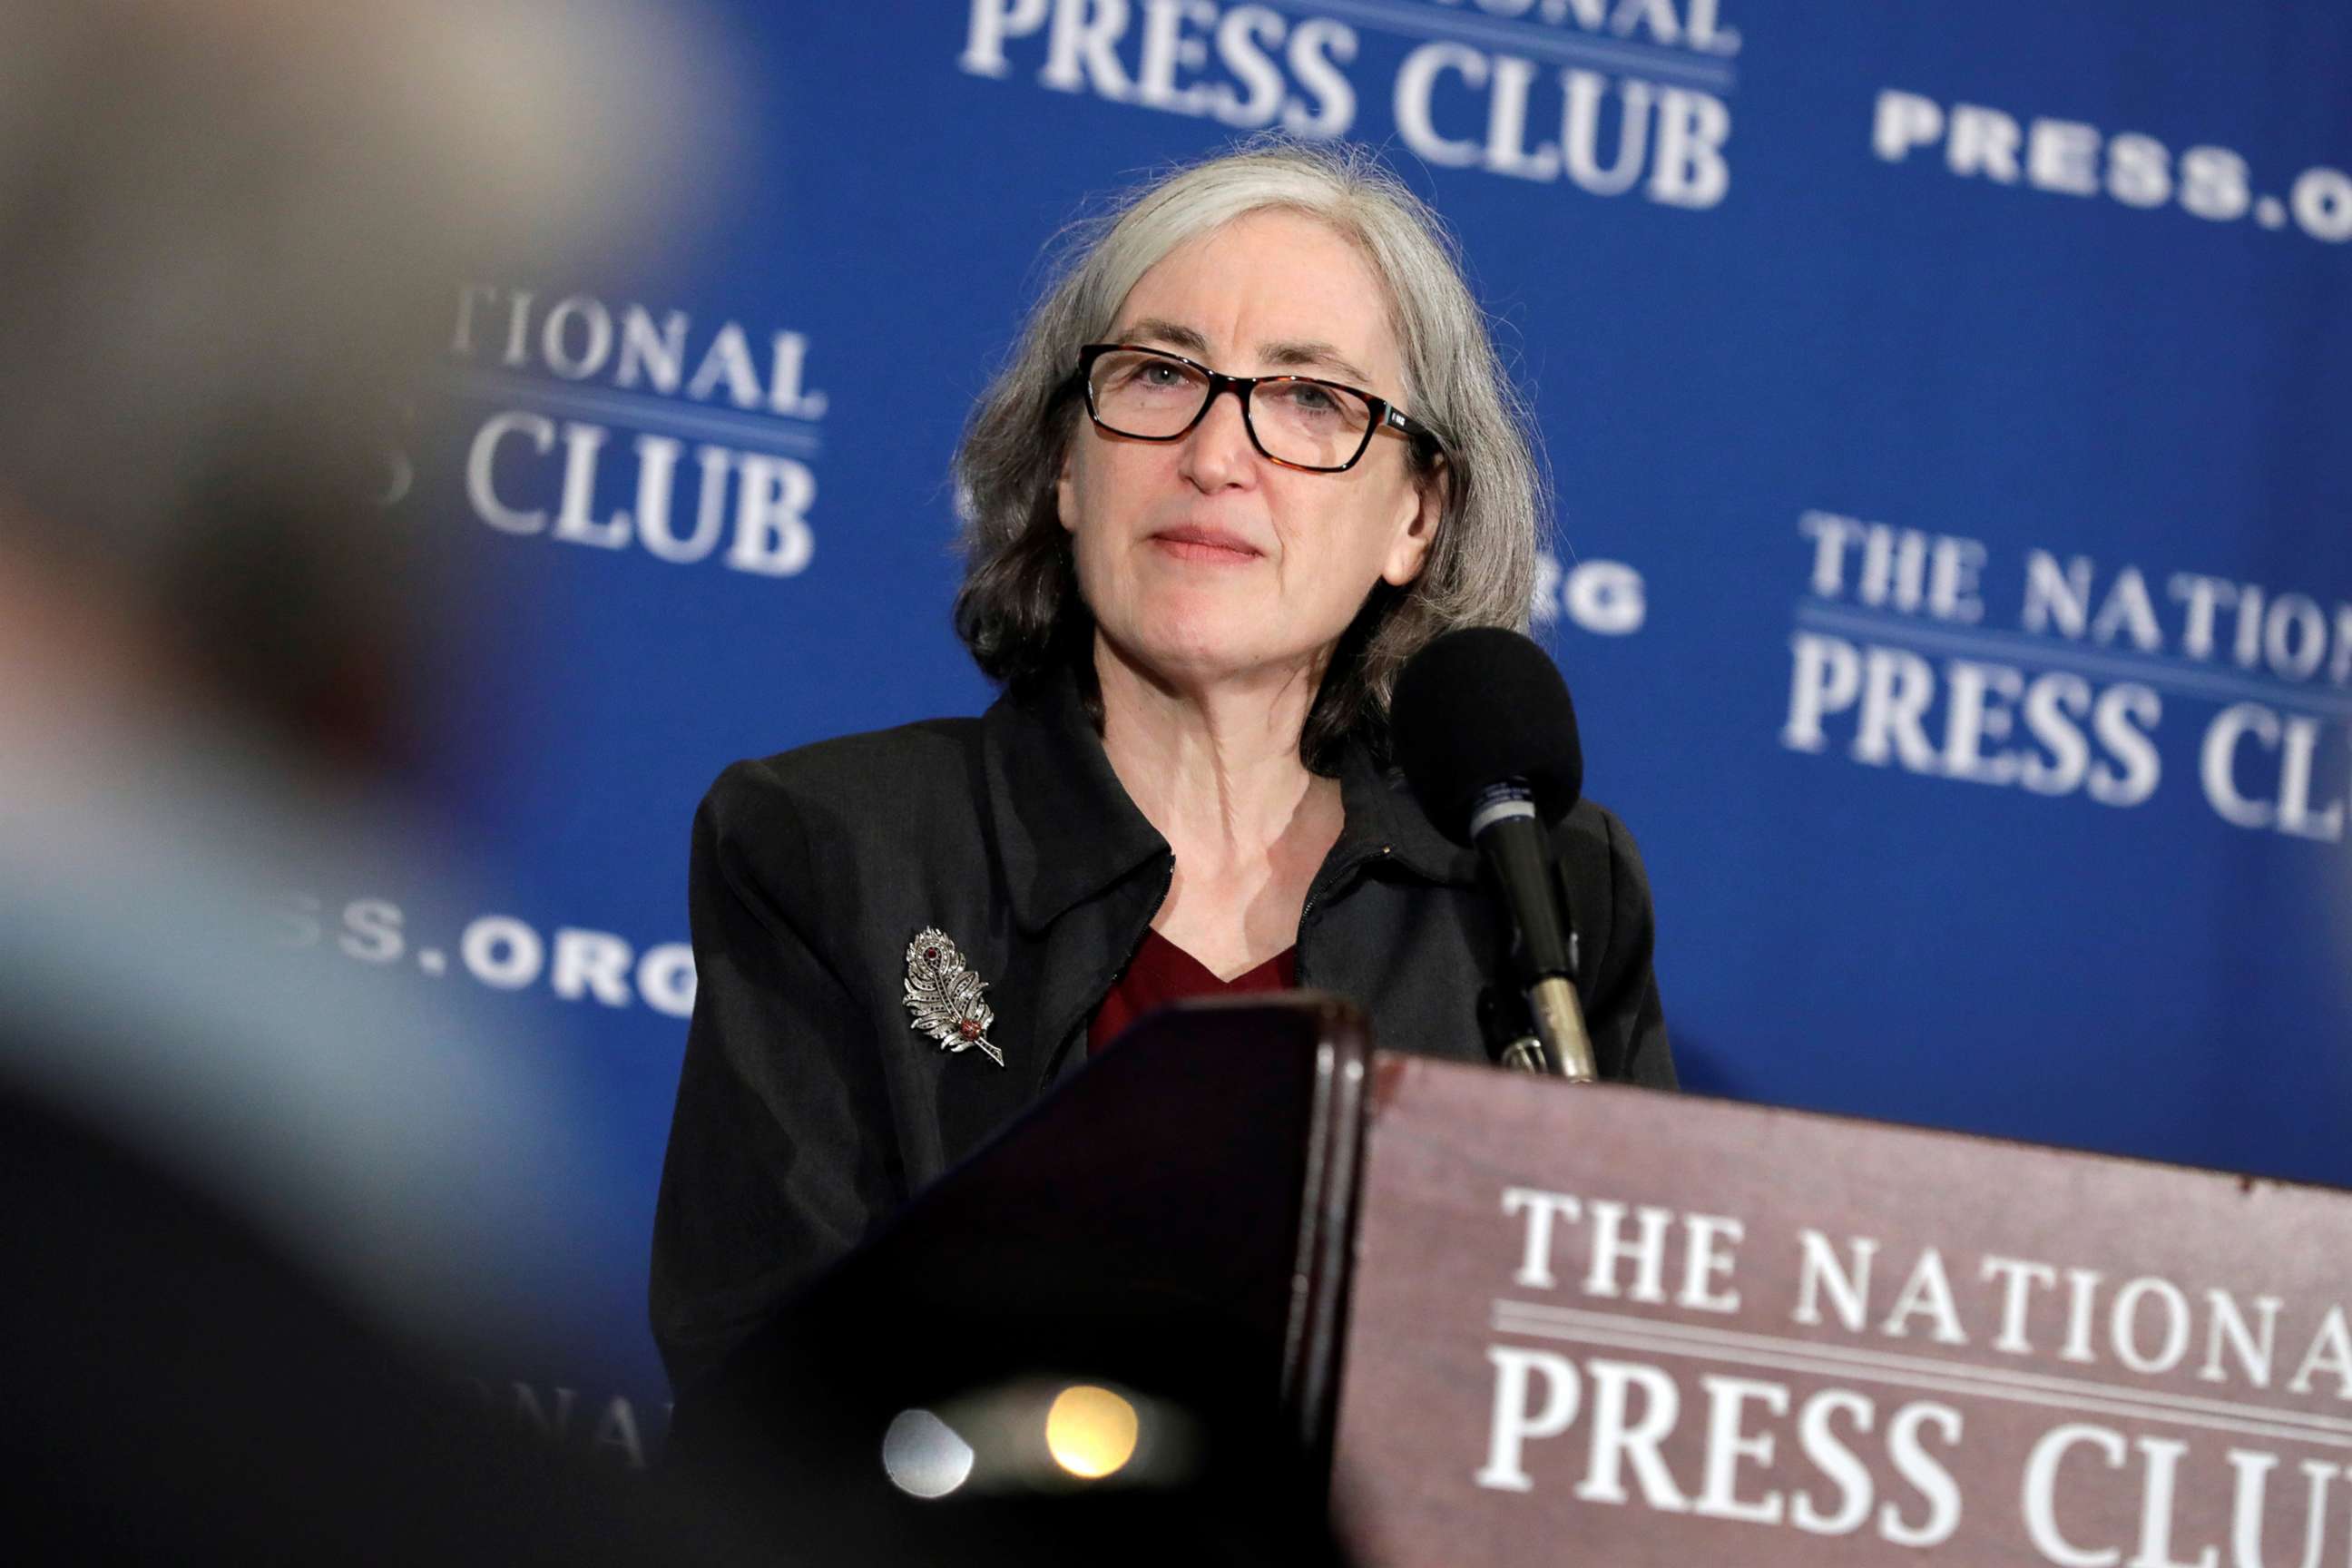 PHOTO: Dr. Anne Schuchat, Principal Deputy Director of the Centers for Disease Control and Prevention holds a news conference at the National Press Club in Washington, D.C., Feb. 11, 2020.